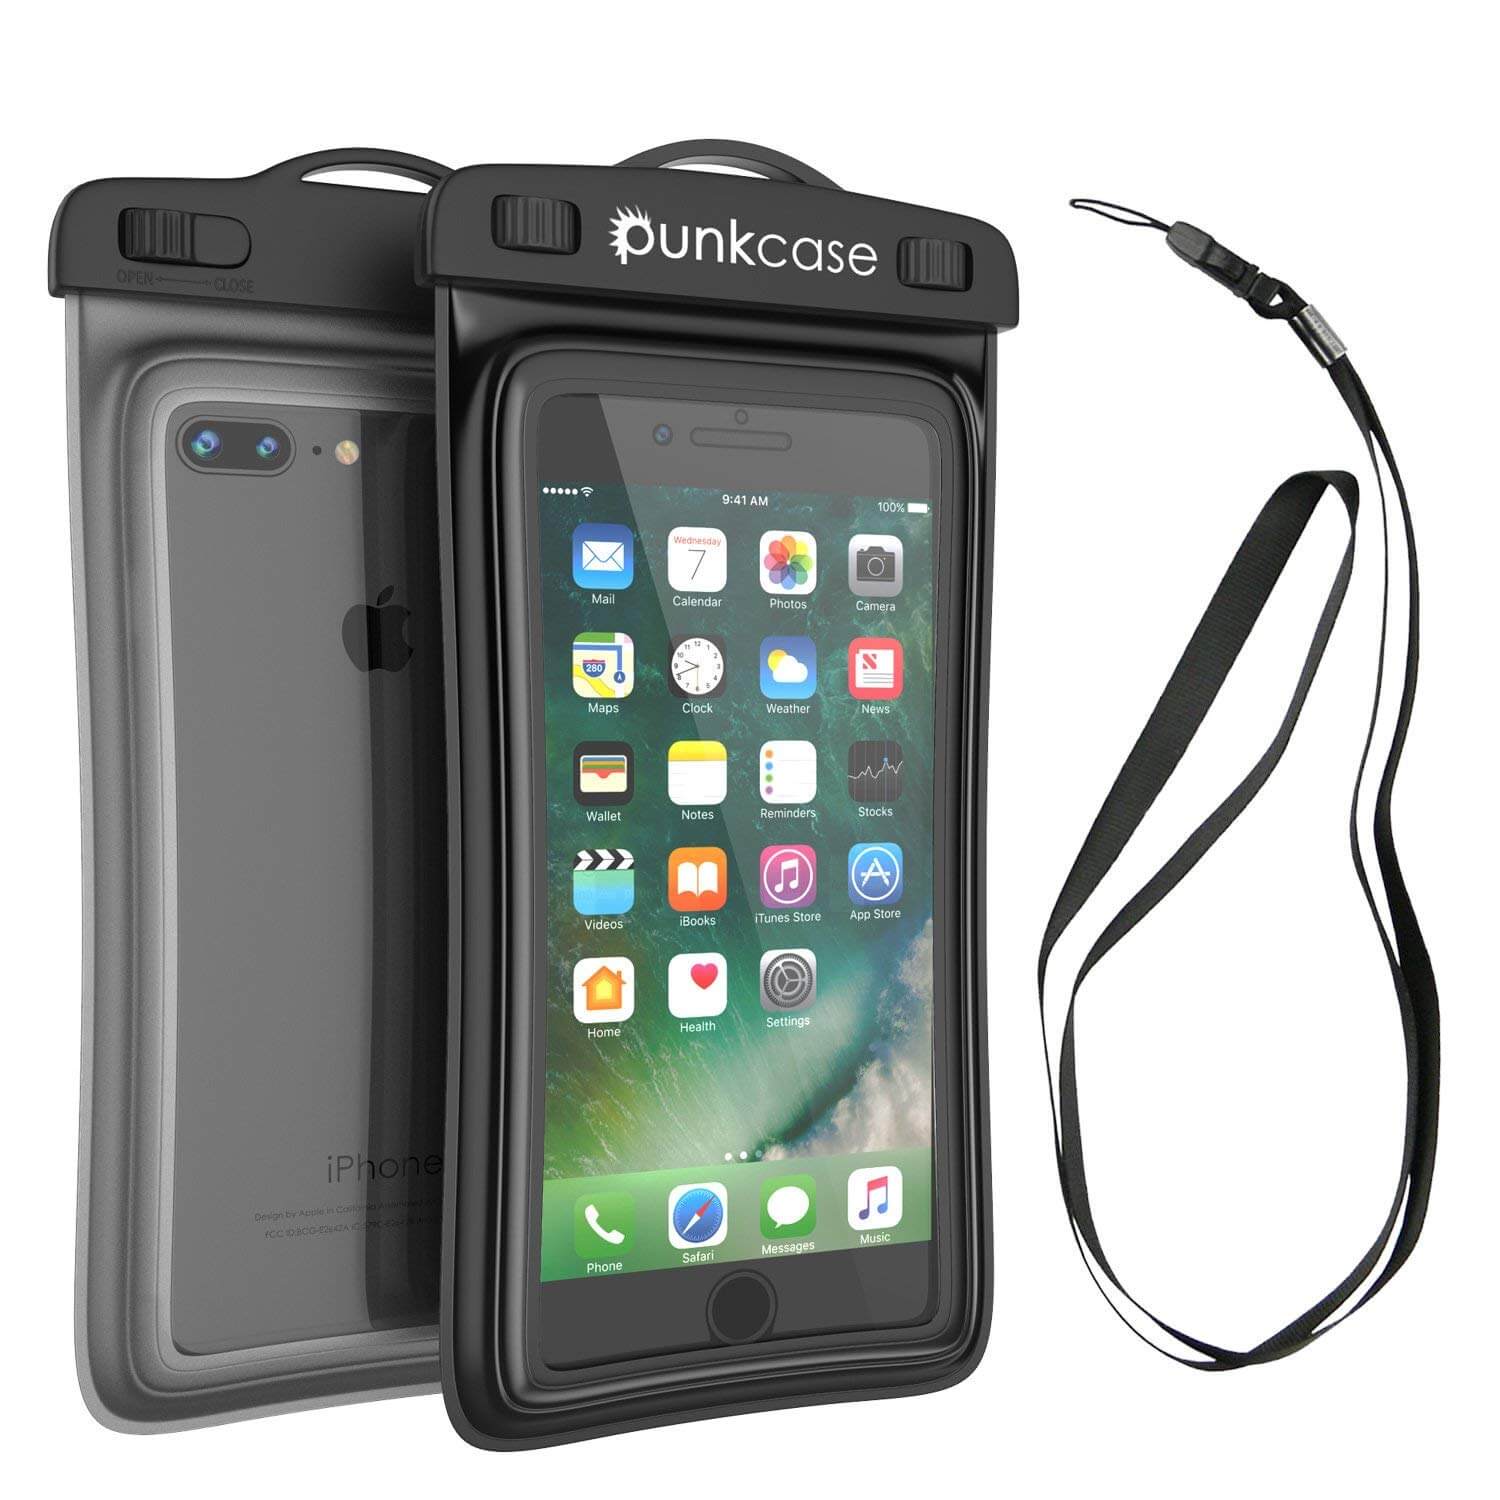 Link Waterproof Ipx8 Case Phone Holder Pouch Up To 10.5